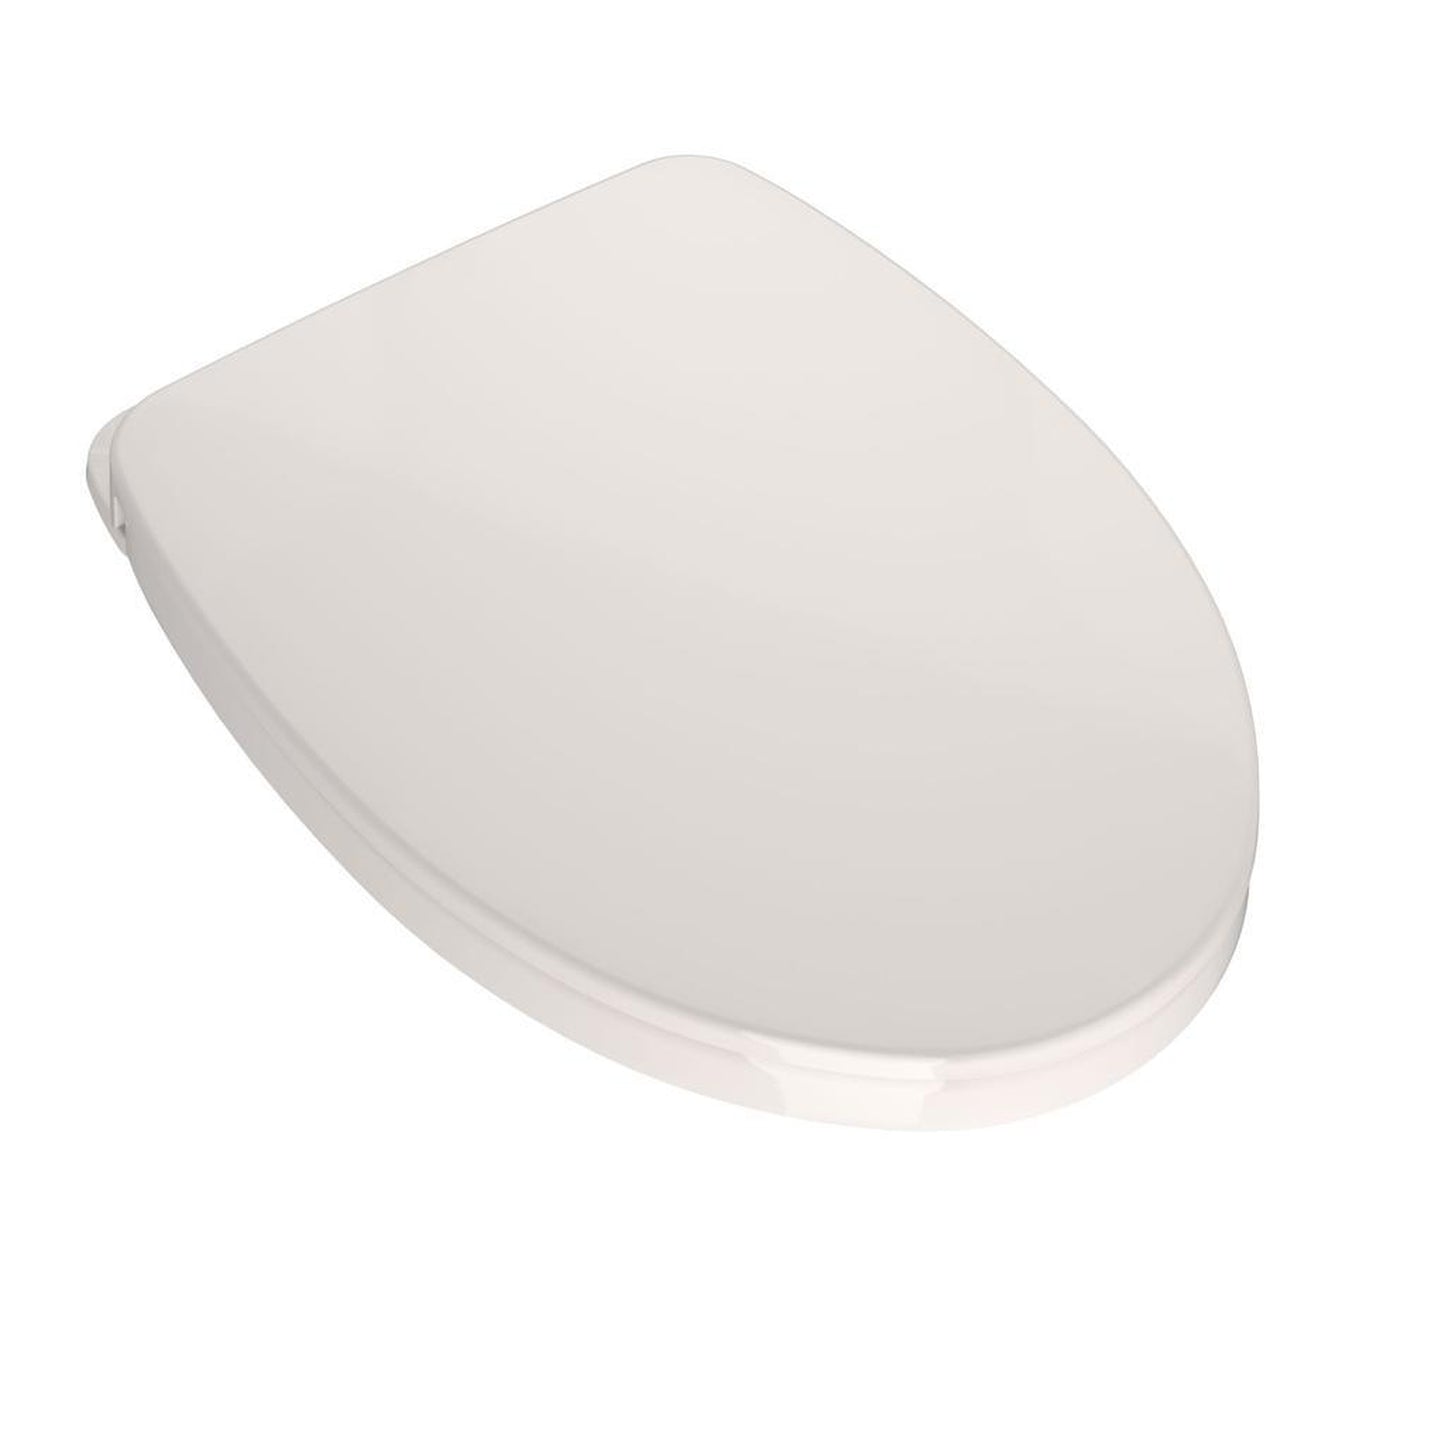 Toto Colonial White Elongated Softclose Toilet Seat